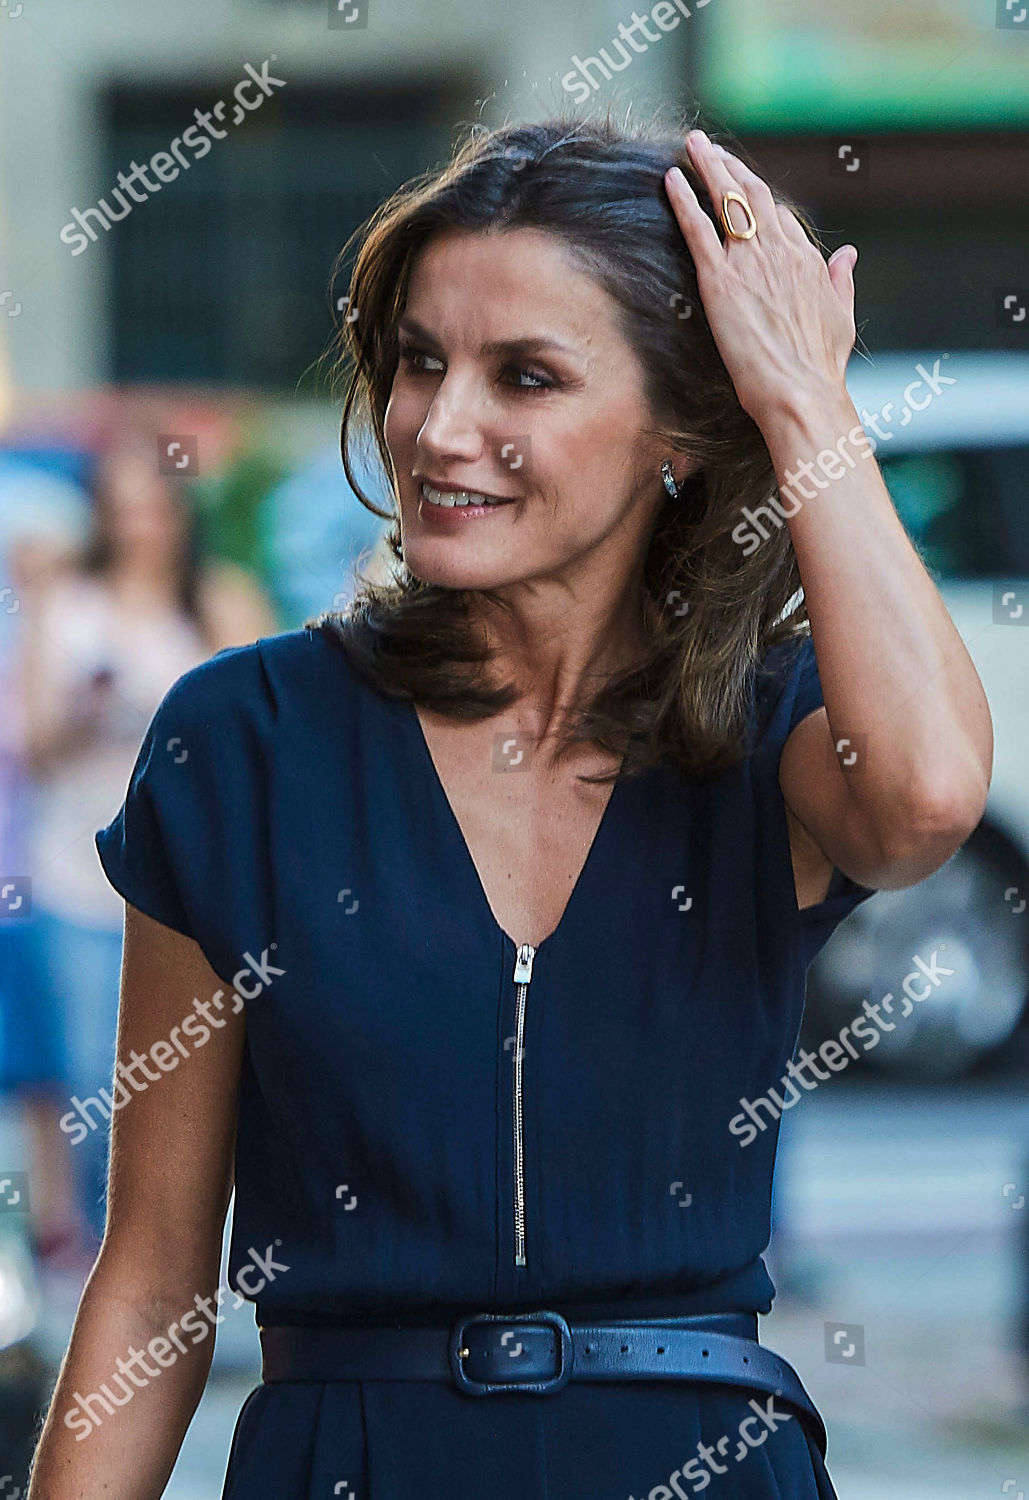 queen-letizia-attends-the-final-of-the-scientific-monologue-contest-famelab-spain-madrid-spain-shutterstock-editorial-10237200i.jpg